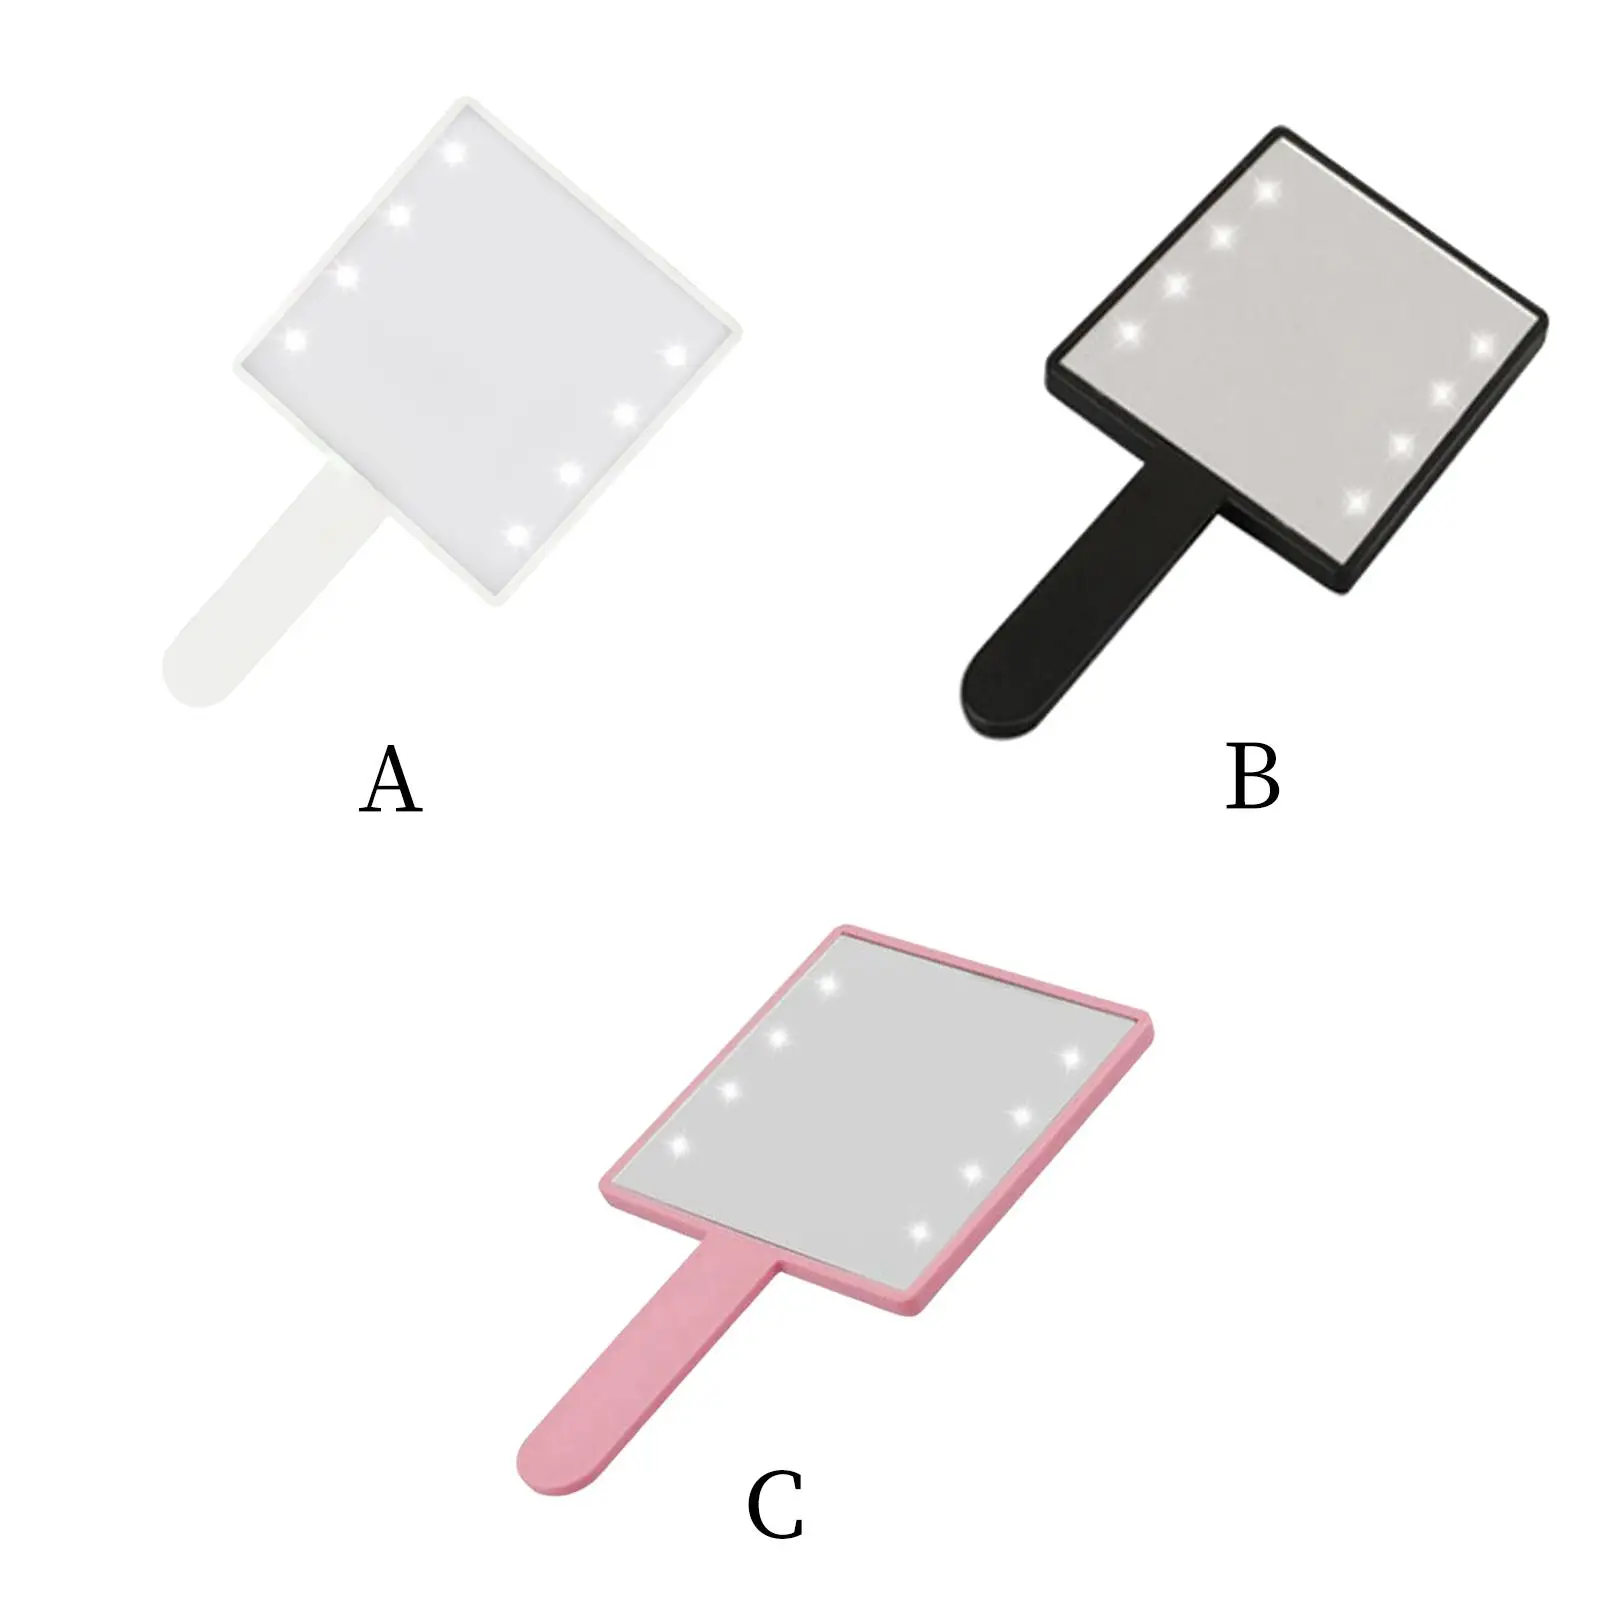 Makeup  Light with 8x LED Beads Square Vanity Mirror Gift for Woman Handheld Travel Makeup Mirror with Handle Small for Home